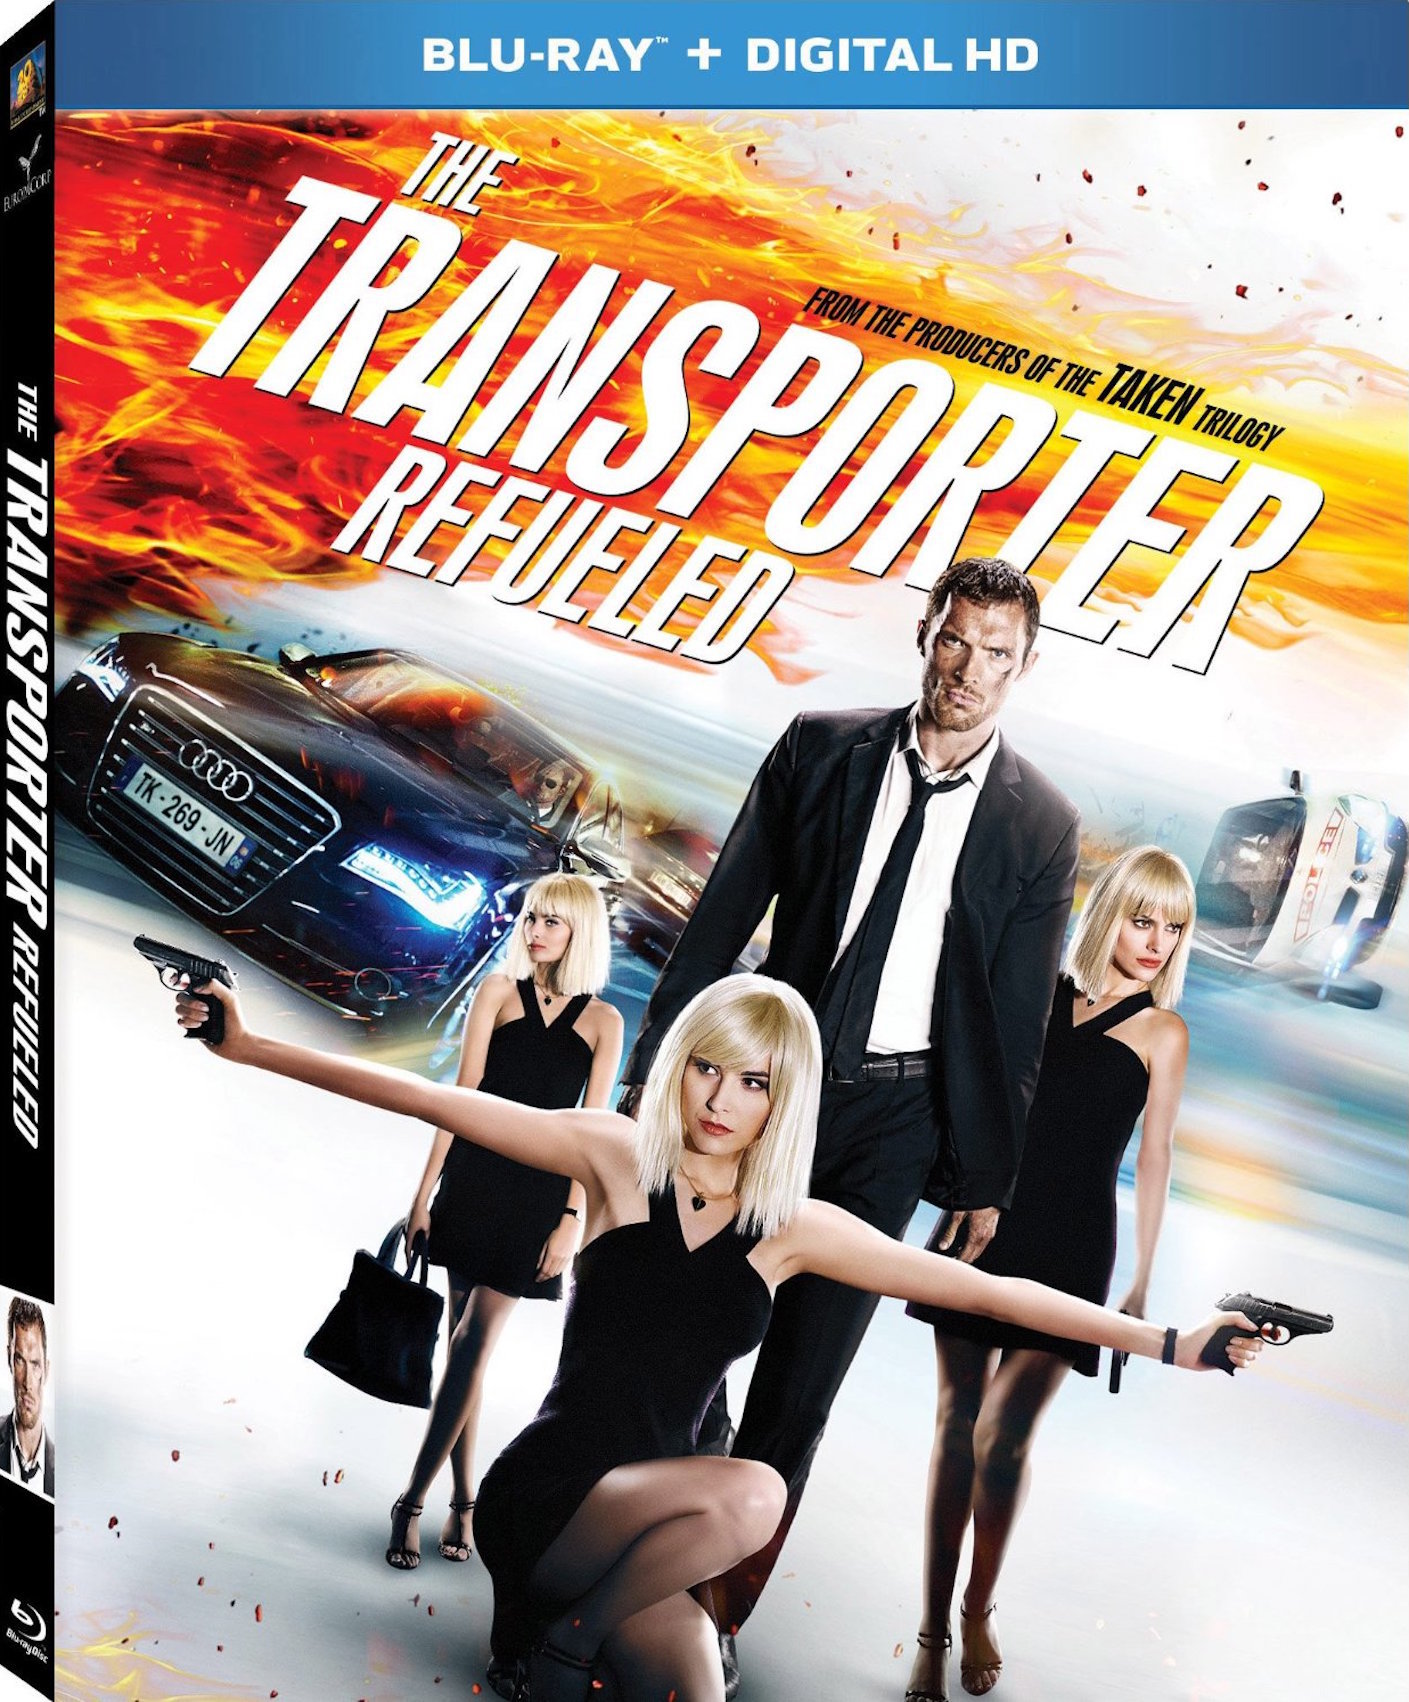 the transporter 4 refueled 2015 hd